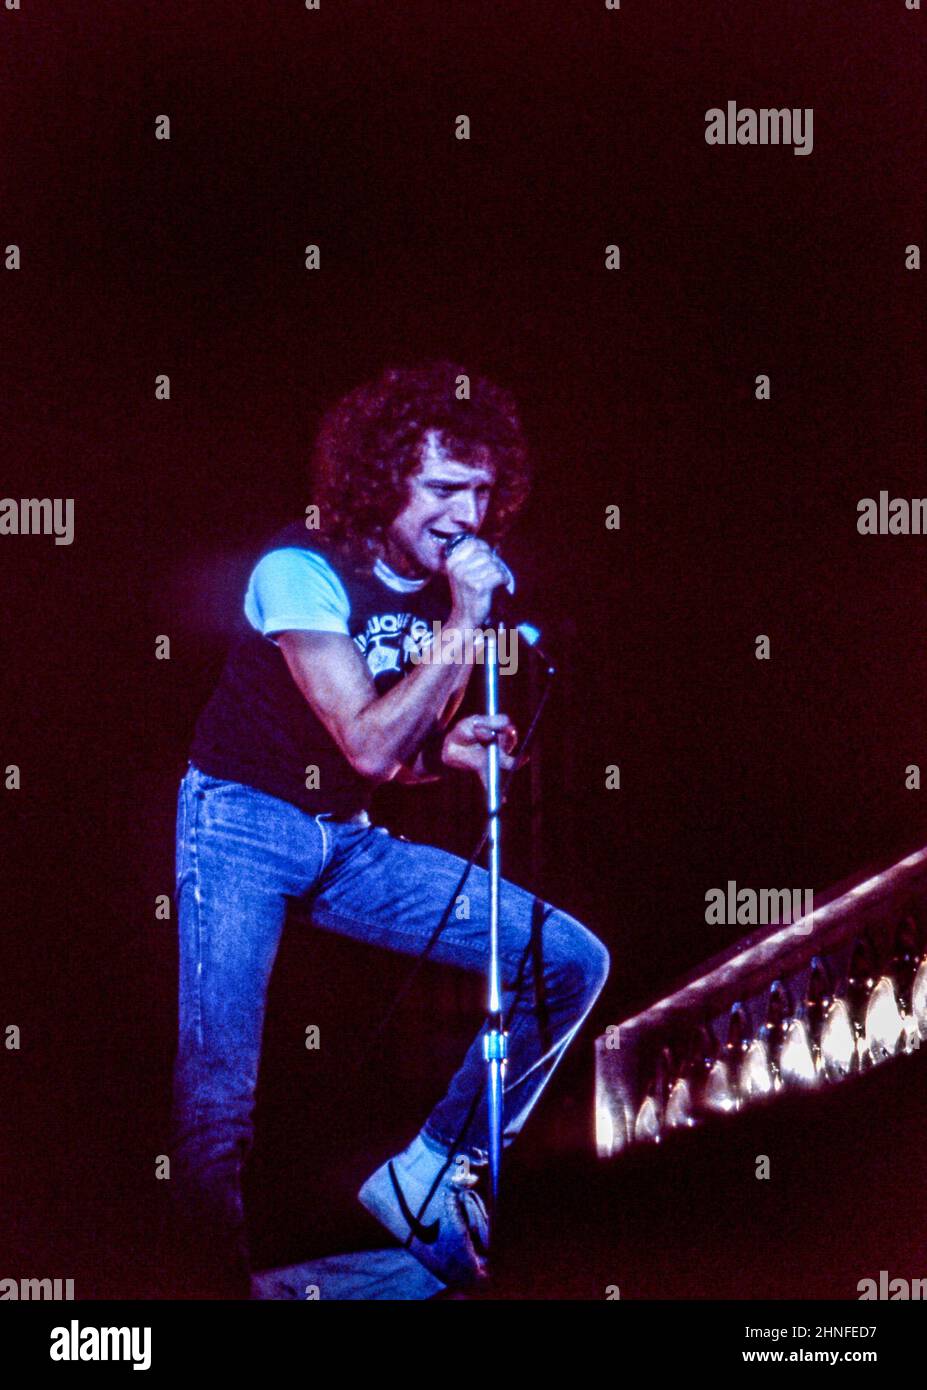 Singer Lou Gramm performing with of Anglo-American band Foreigner at Wembley Arena, London in 1982. Stock Photo